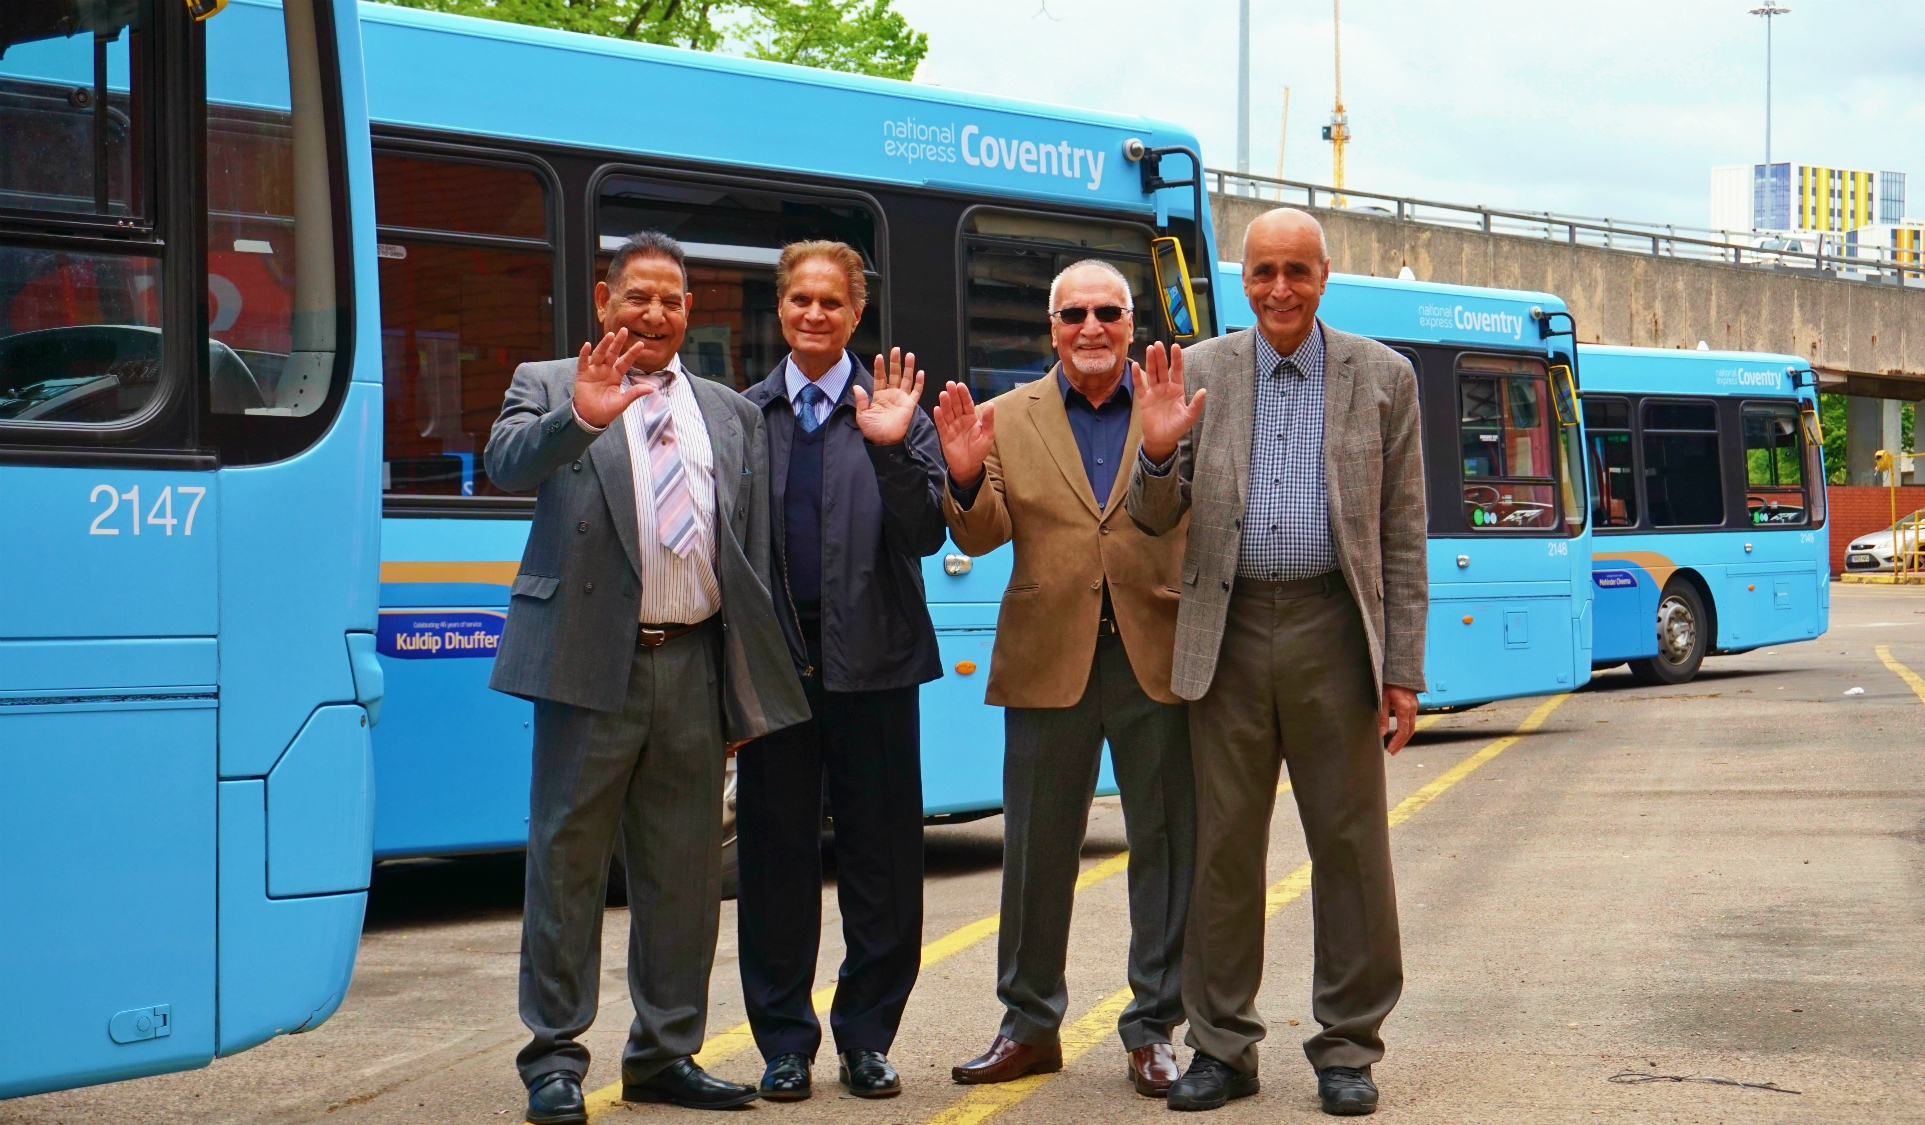 Image for National Express Coventry thanks drivers for incredible 200 years’ service